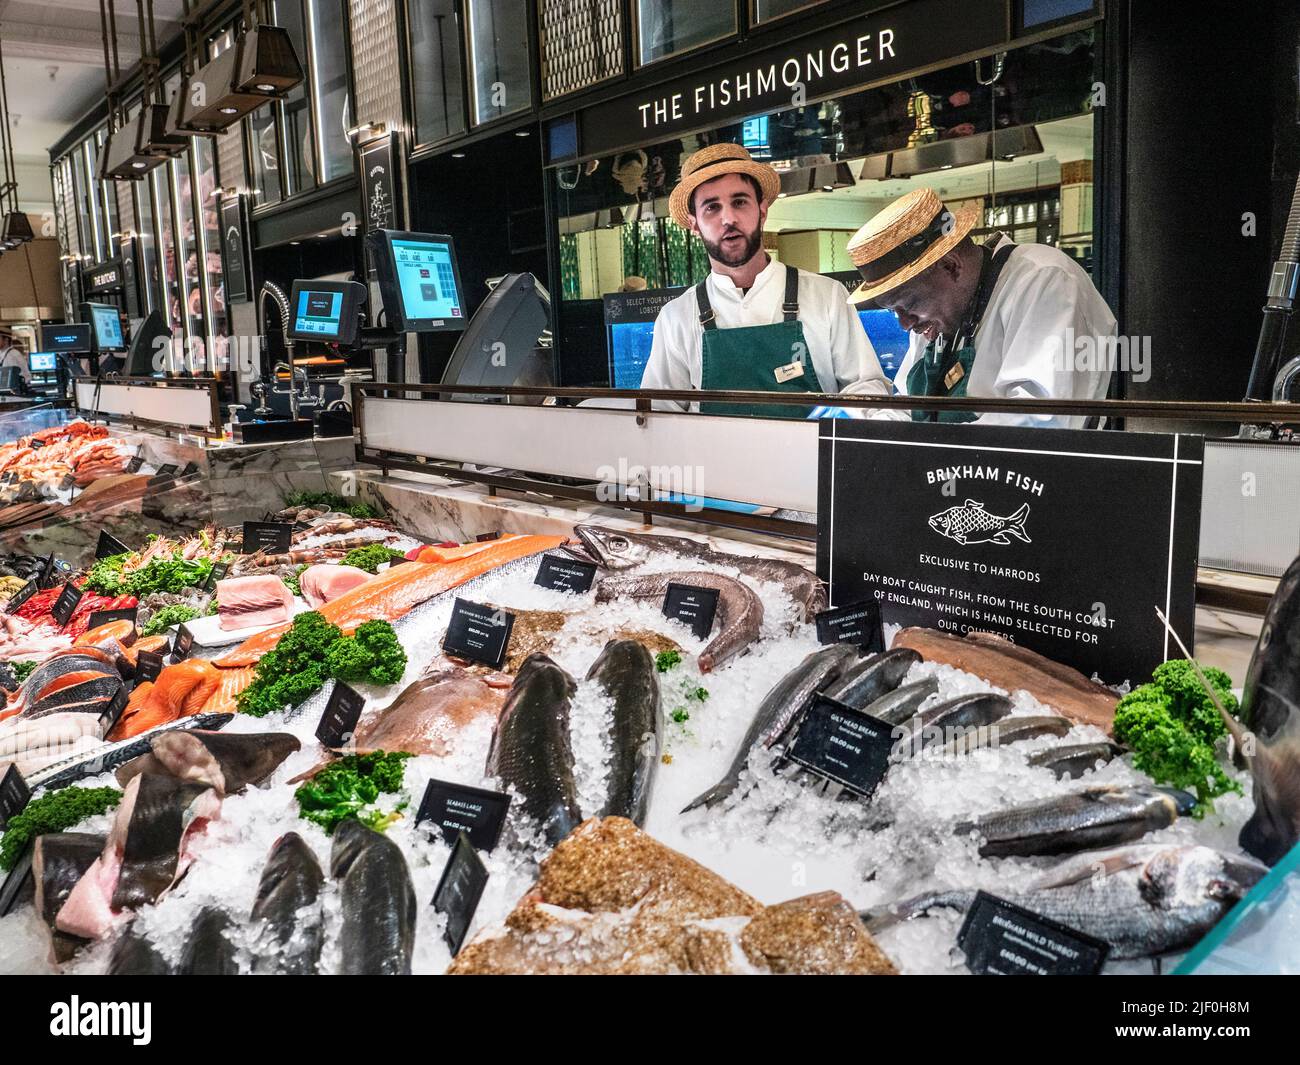 Harrods Fishmonger Fresh Brixham Fish Food Hall interior featuring 'The Fishmonger' display with a wide variety of exclusive day boat hand picked Brixham UK British fish. Seafood crustacea on display for sale. Sales assistants wearing traditional straw boater hats, preparing a customers selection, Harrods Food Hall Fishmonger department Store Mall Shop,  Brompton Rd, Knightsbridge, London SW1X 7XL Stock Photo